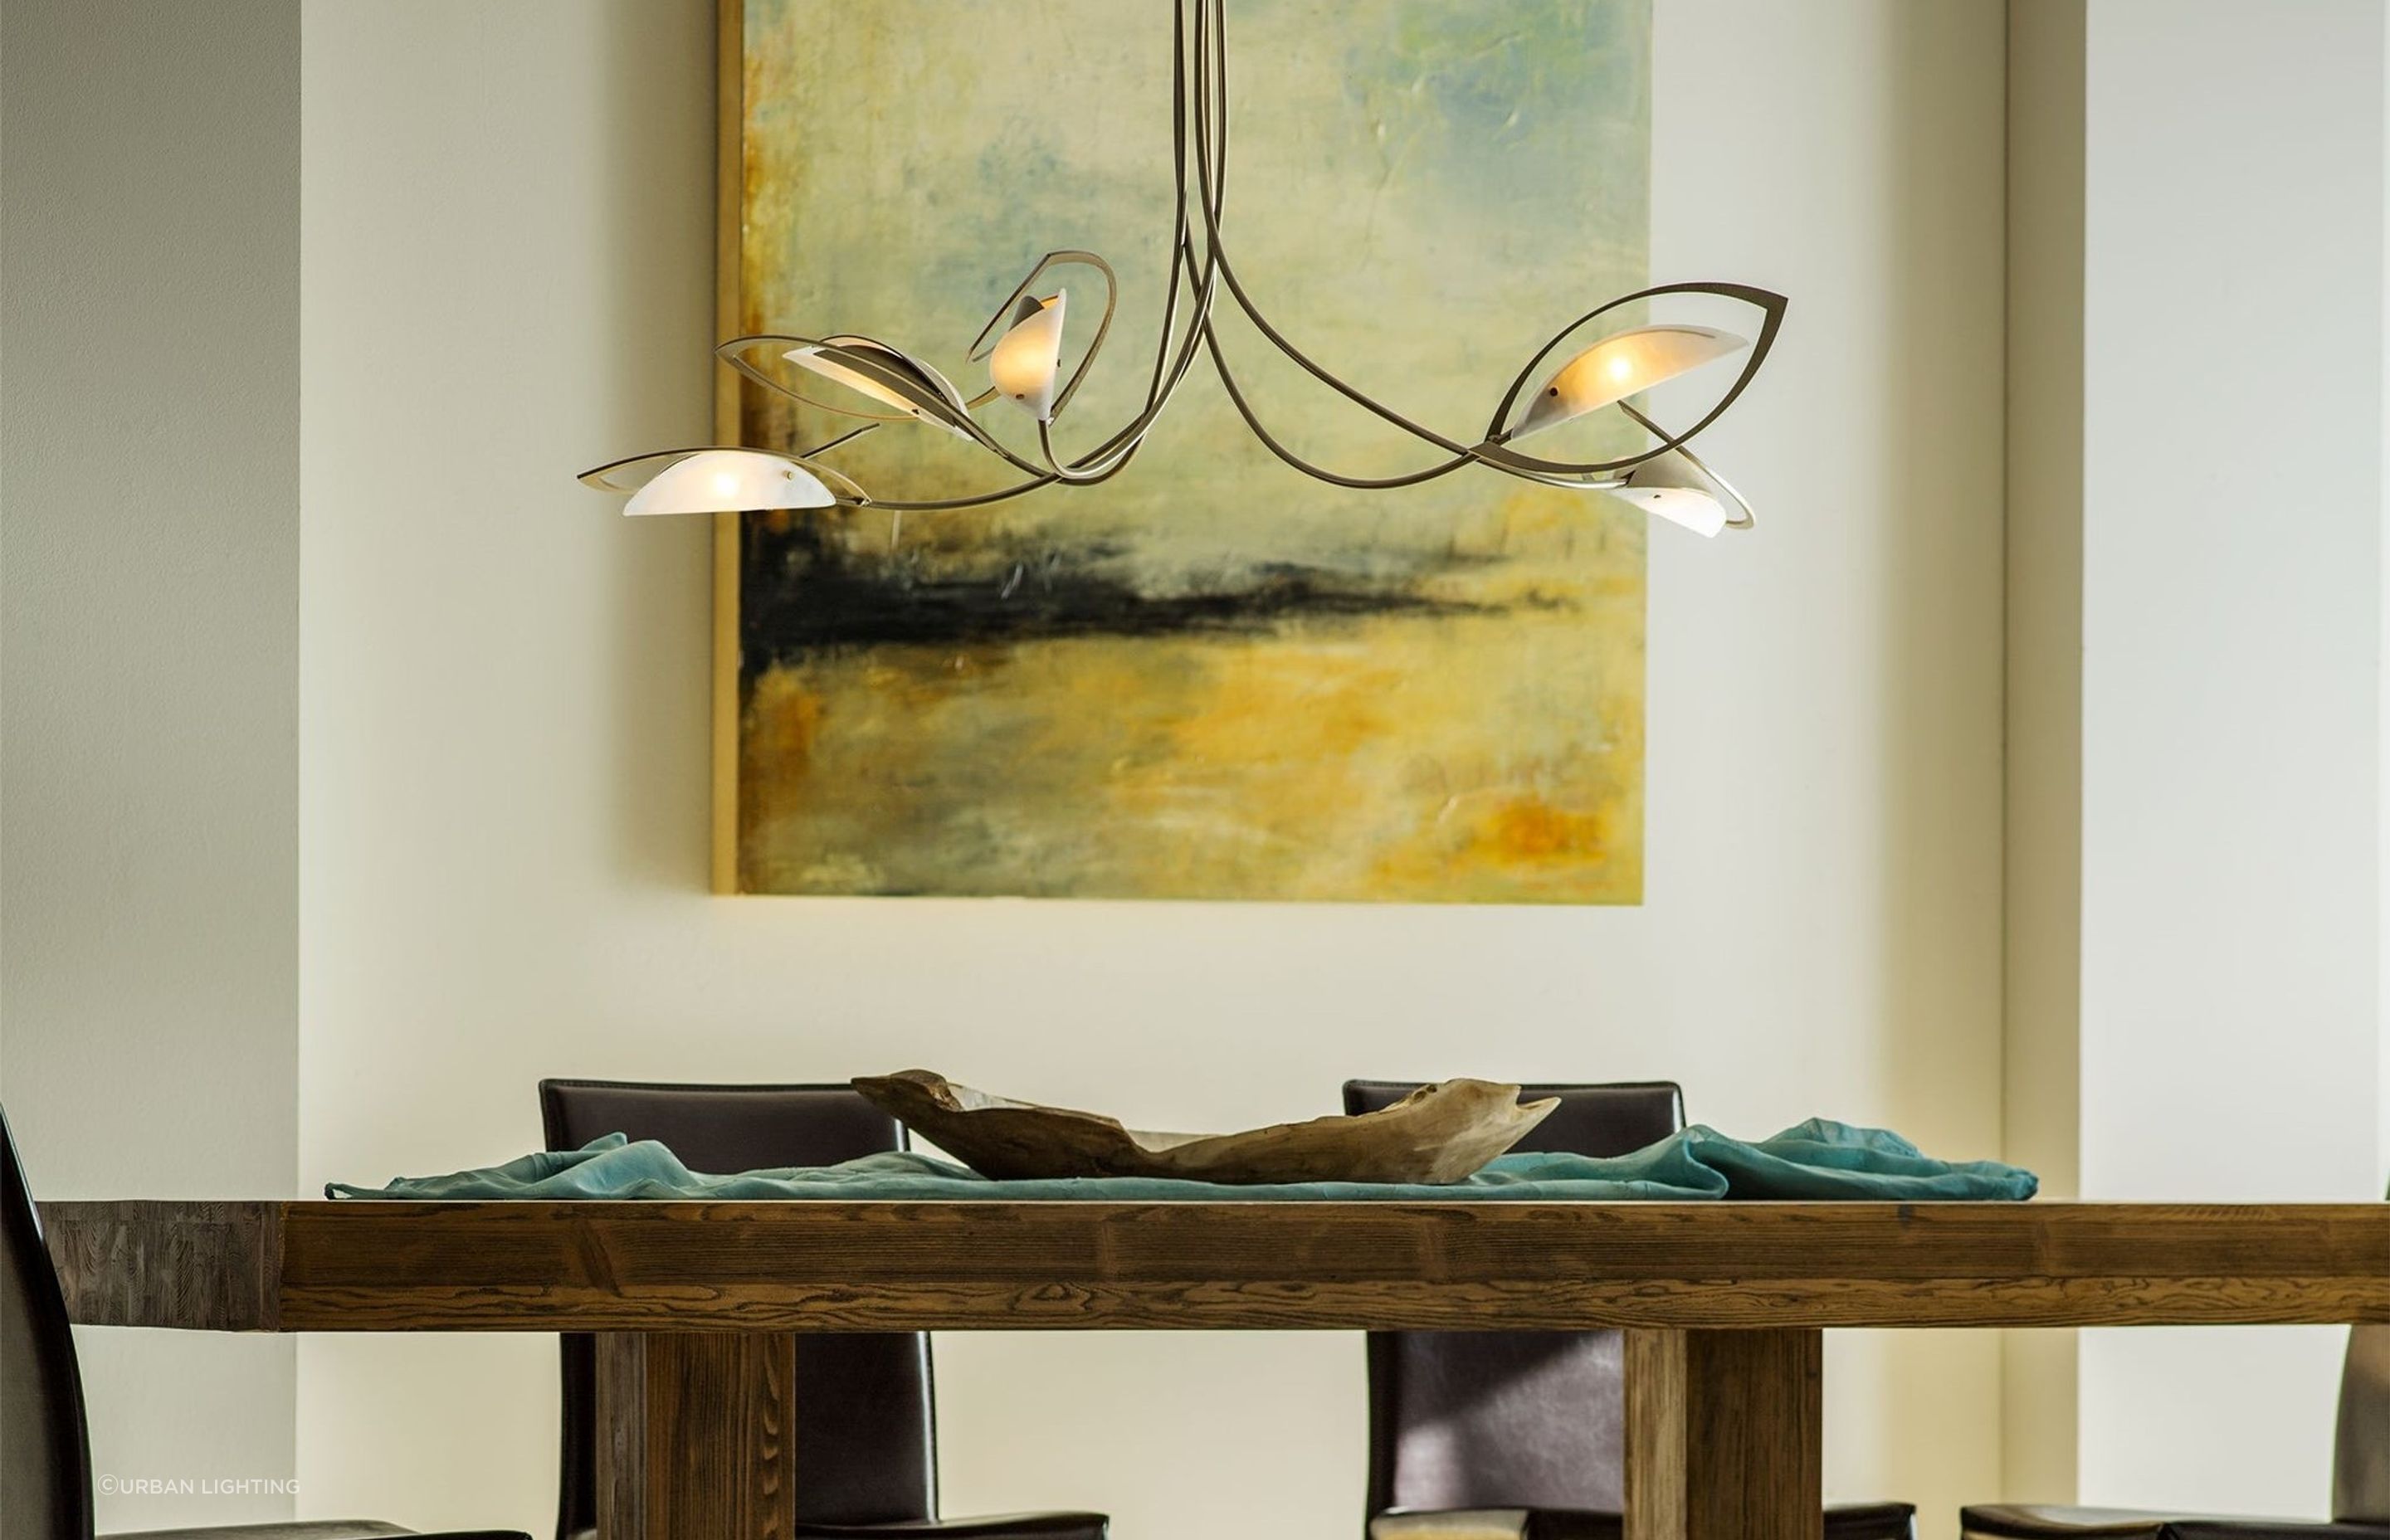 The Aerial Pendant is a sleek and luxurious example of lighting that strikes an artistic balance of materials and style